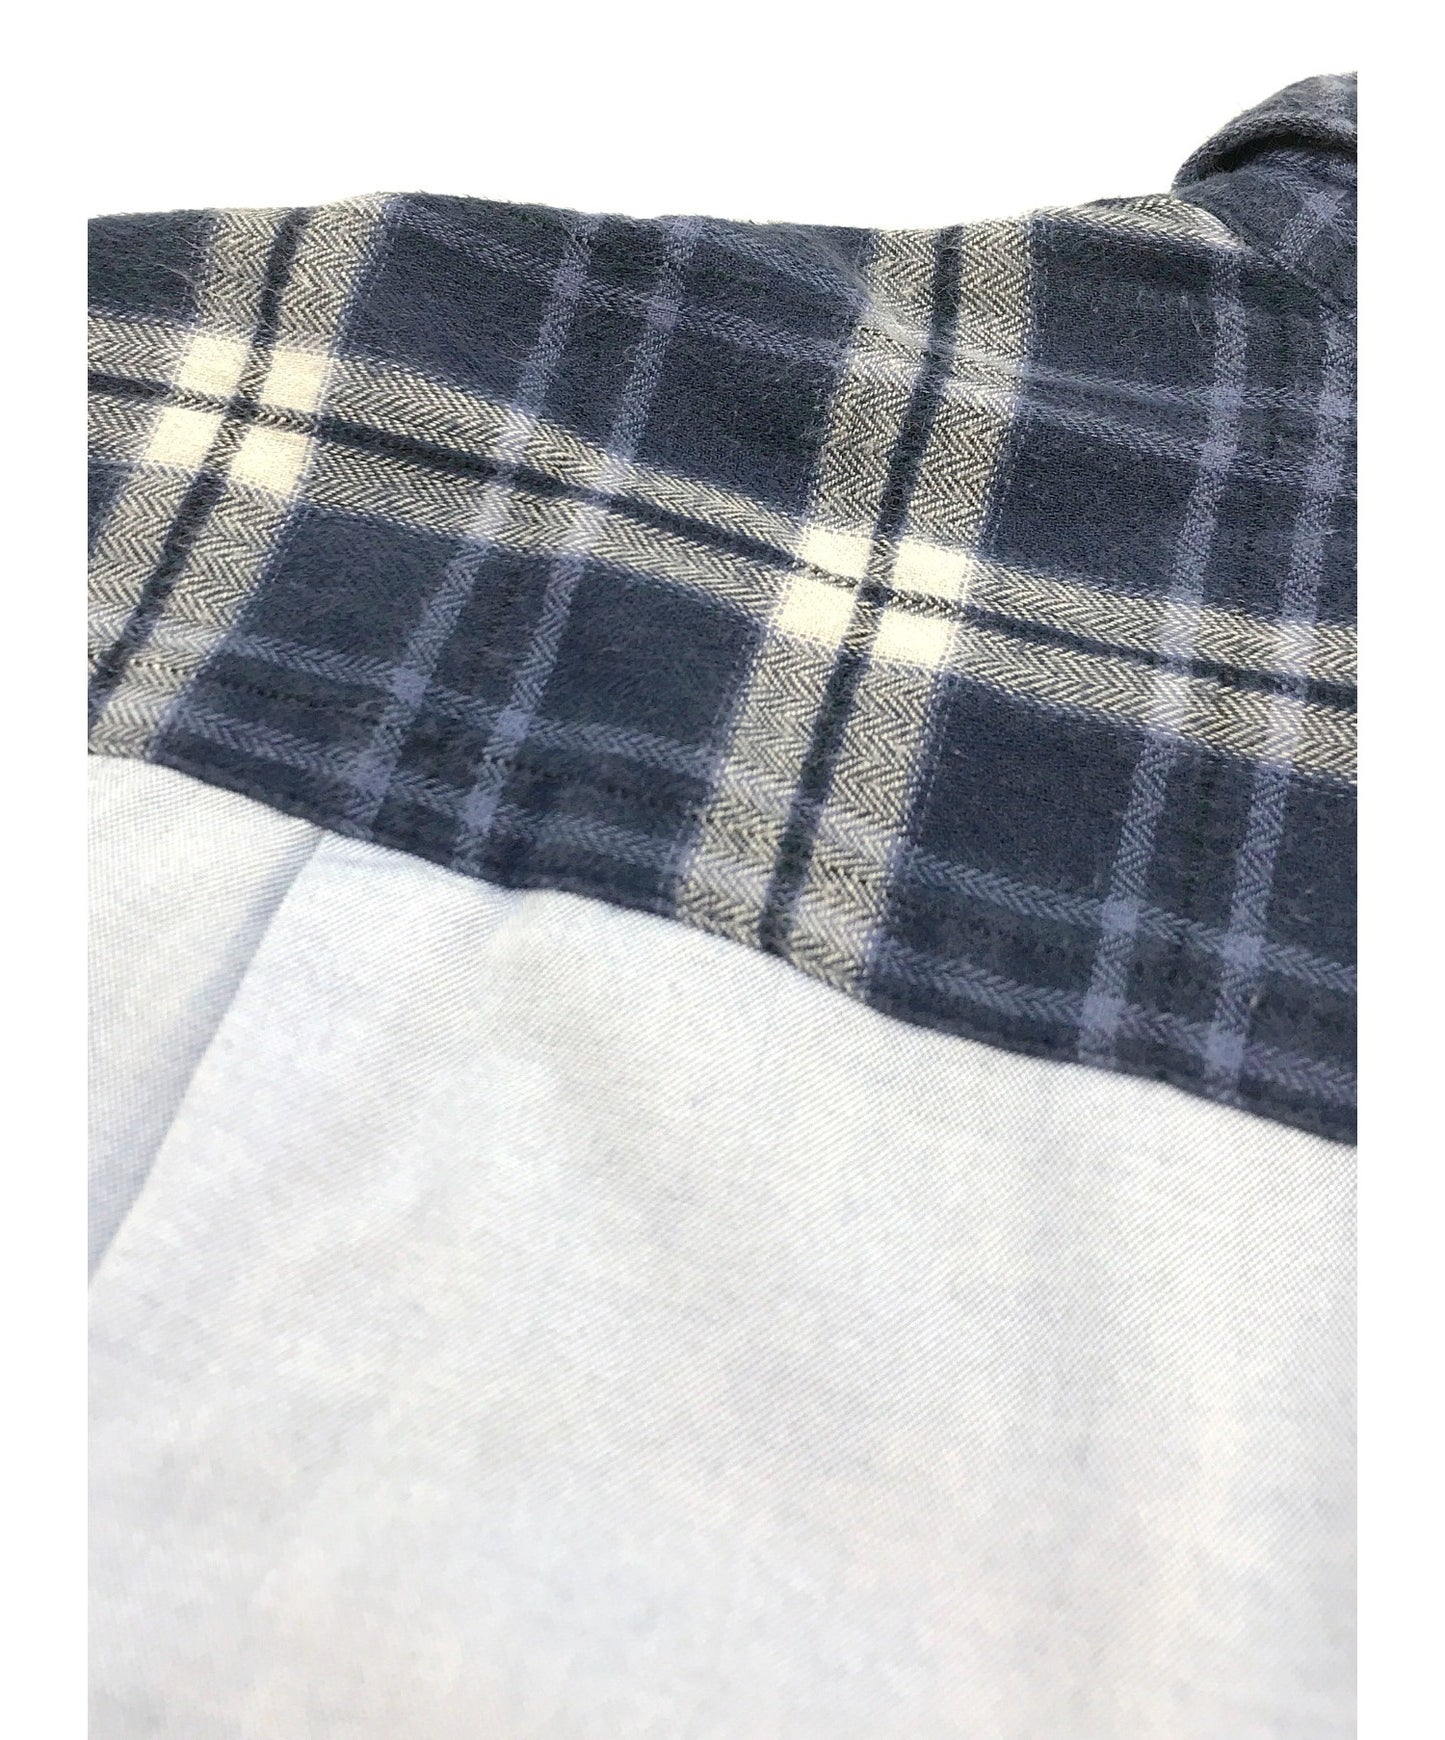 [Pre-owned] COMME des GARCONS HOMME Checked flannel and oxford switch shirt HE-B125